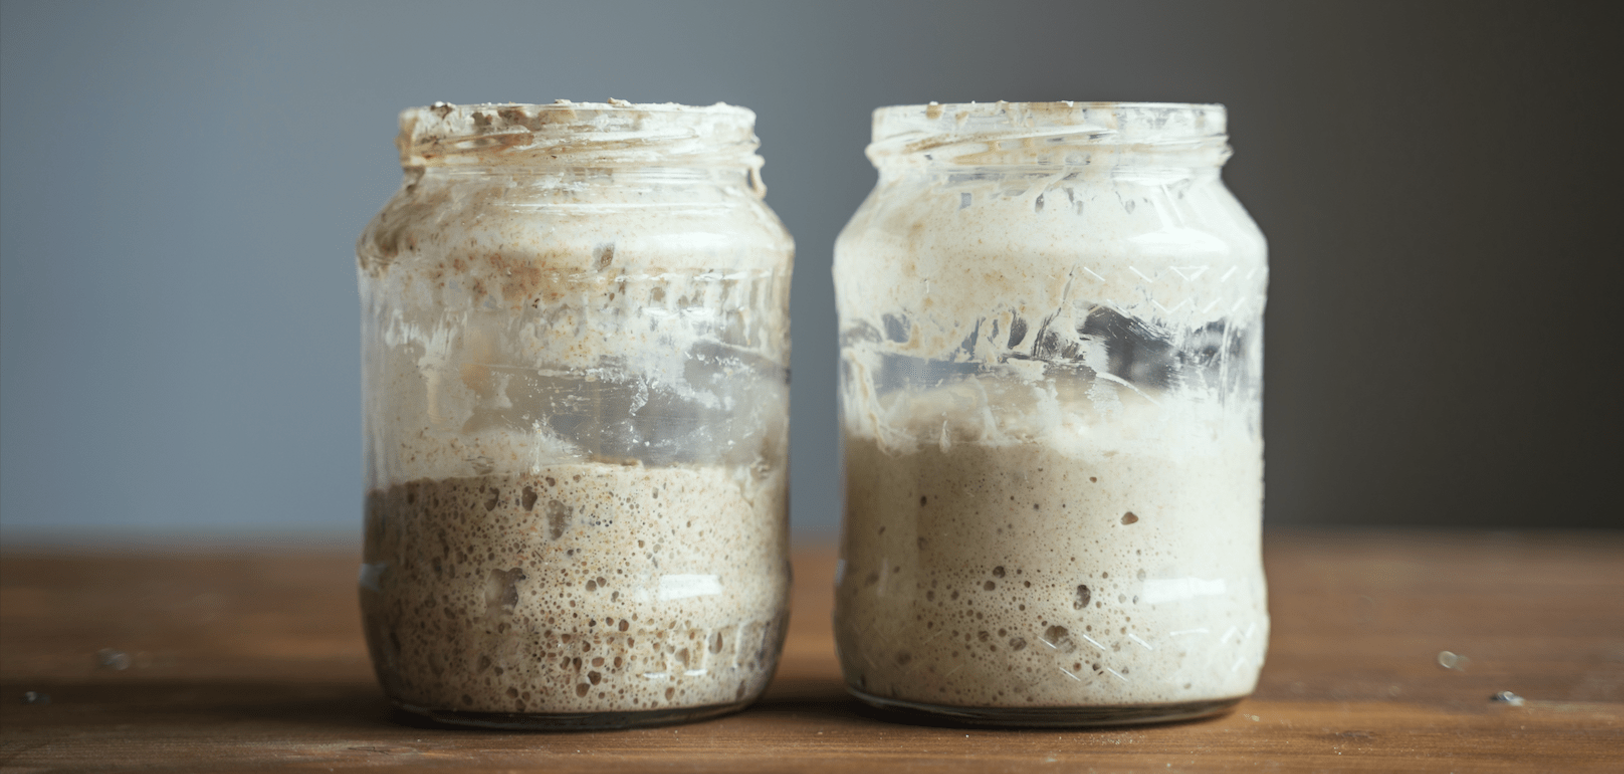 Frequently Asked Questions About Sourdough Starters (Part One)